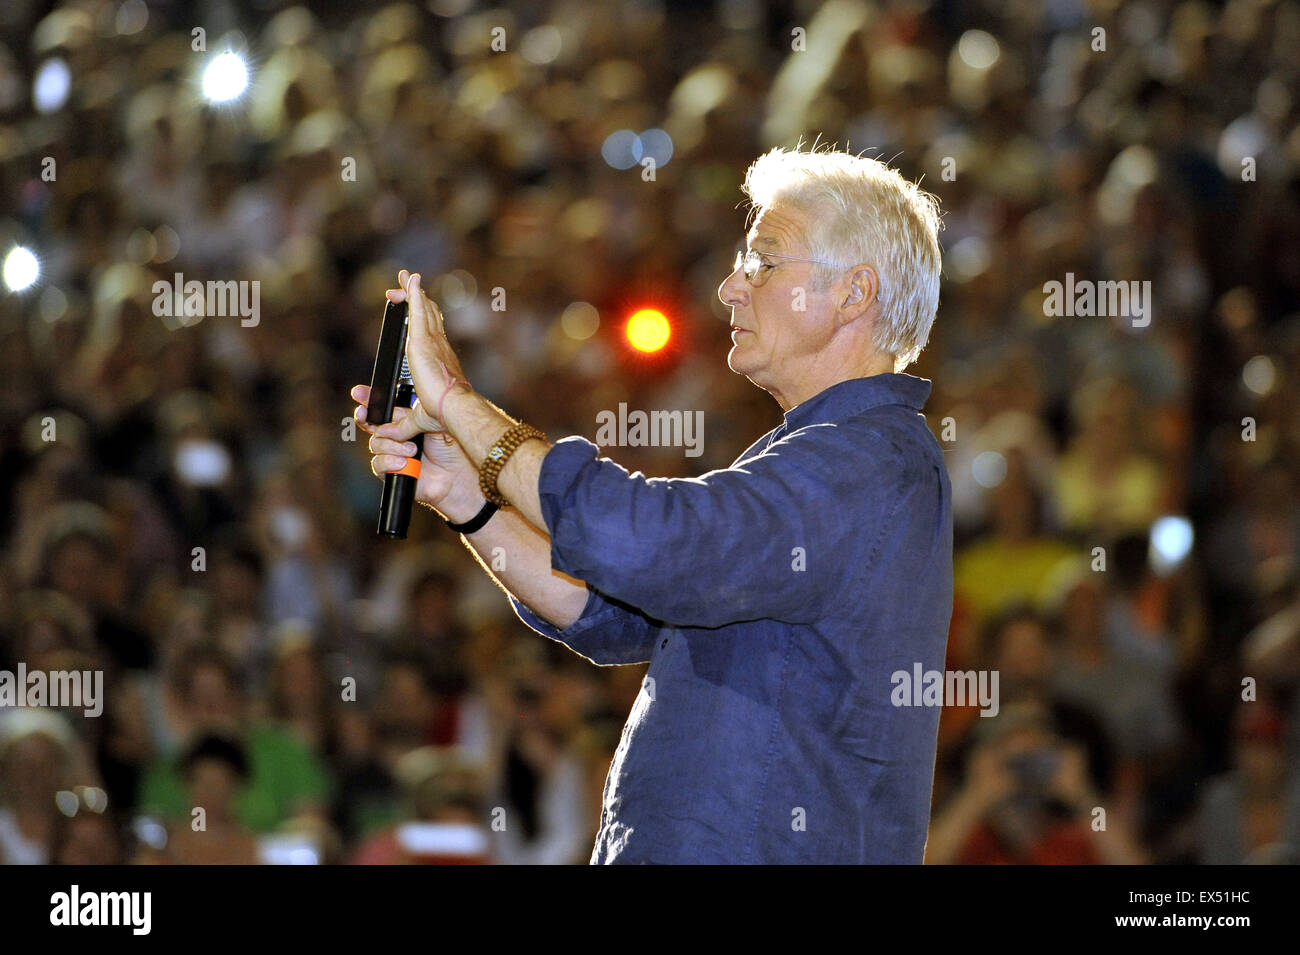 U.S. actor Richard Gere takes a photograph prior to the screening the movie Pretty Woman during the 50th International Film Festival Karlovy Vary, Czech Republic, July 4, 2015. (CTK Photo/Slavomir Kubes) Stock Photo